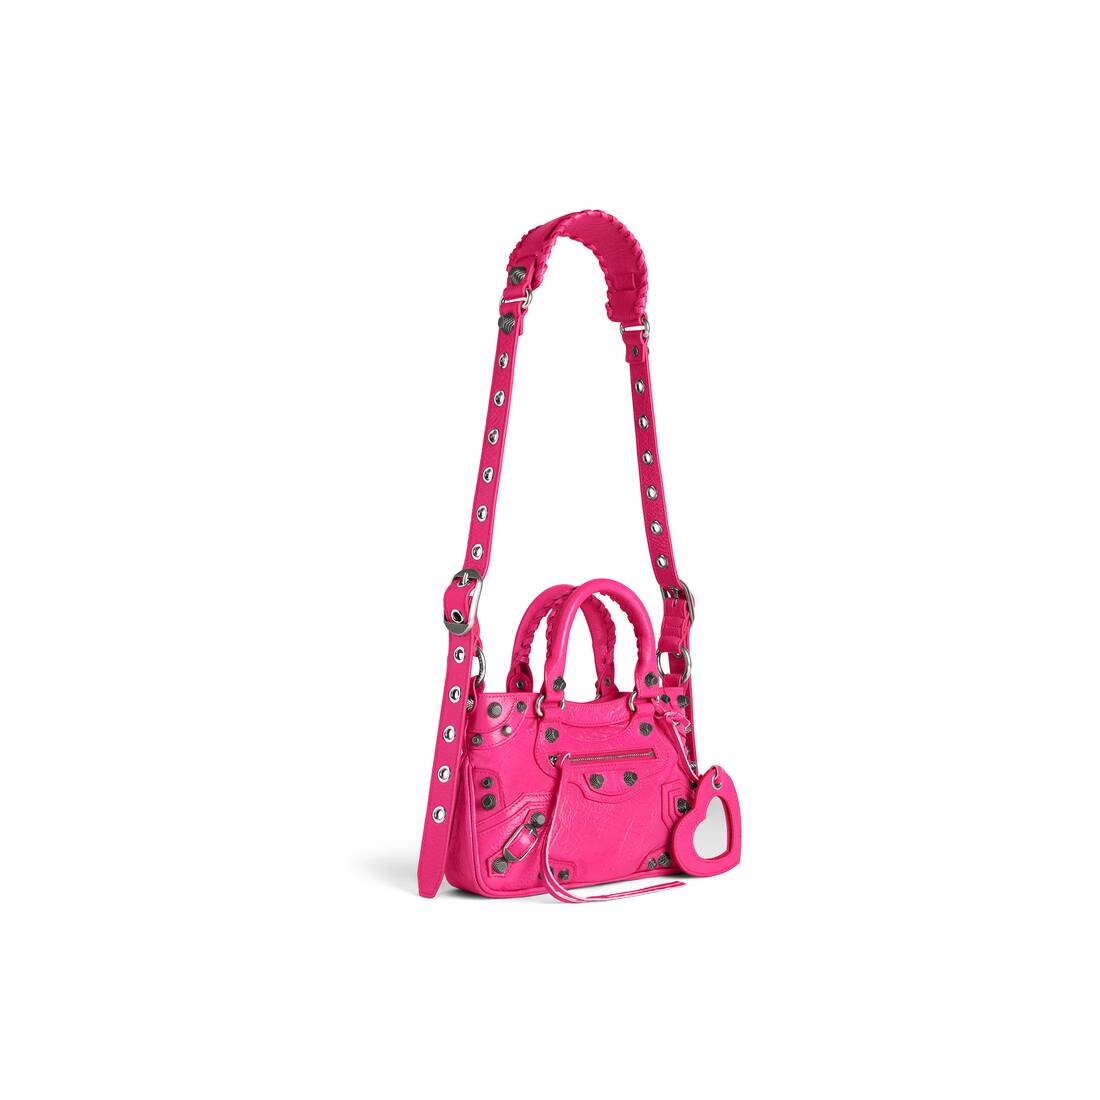 Women's Neo Cagole Small Tote Bag in Bright Pink - 4